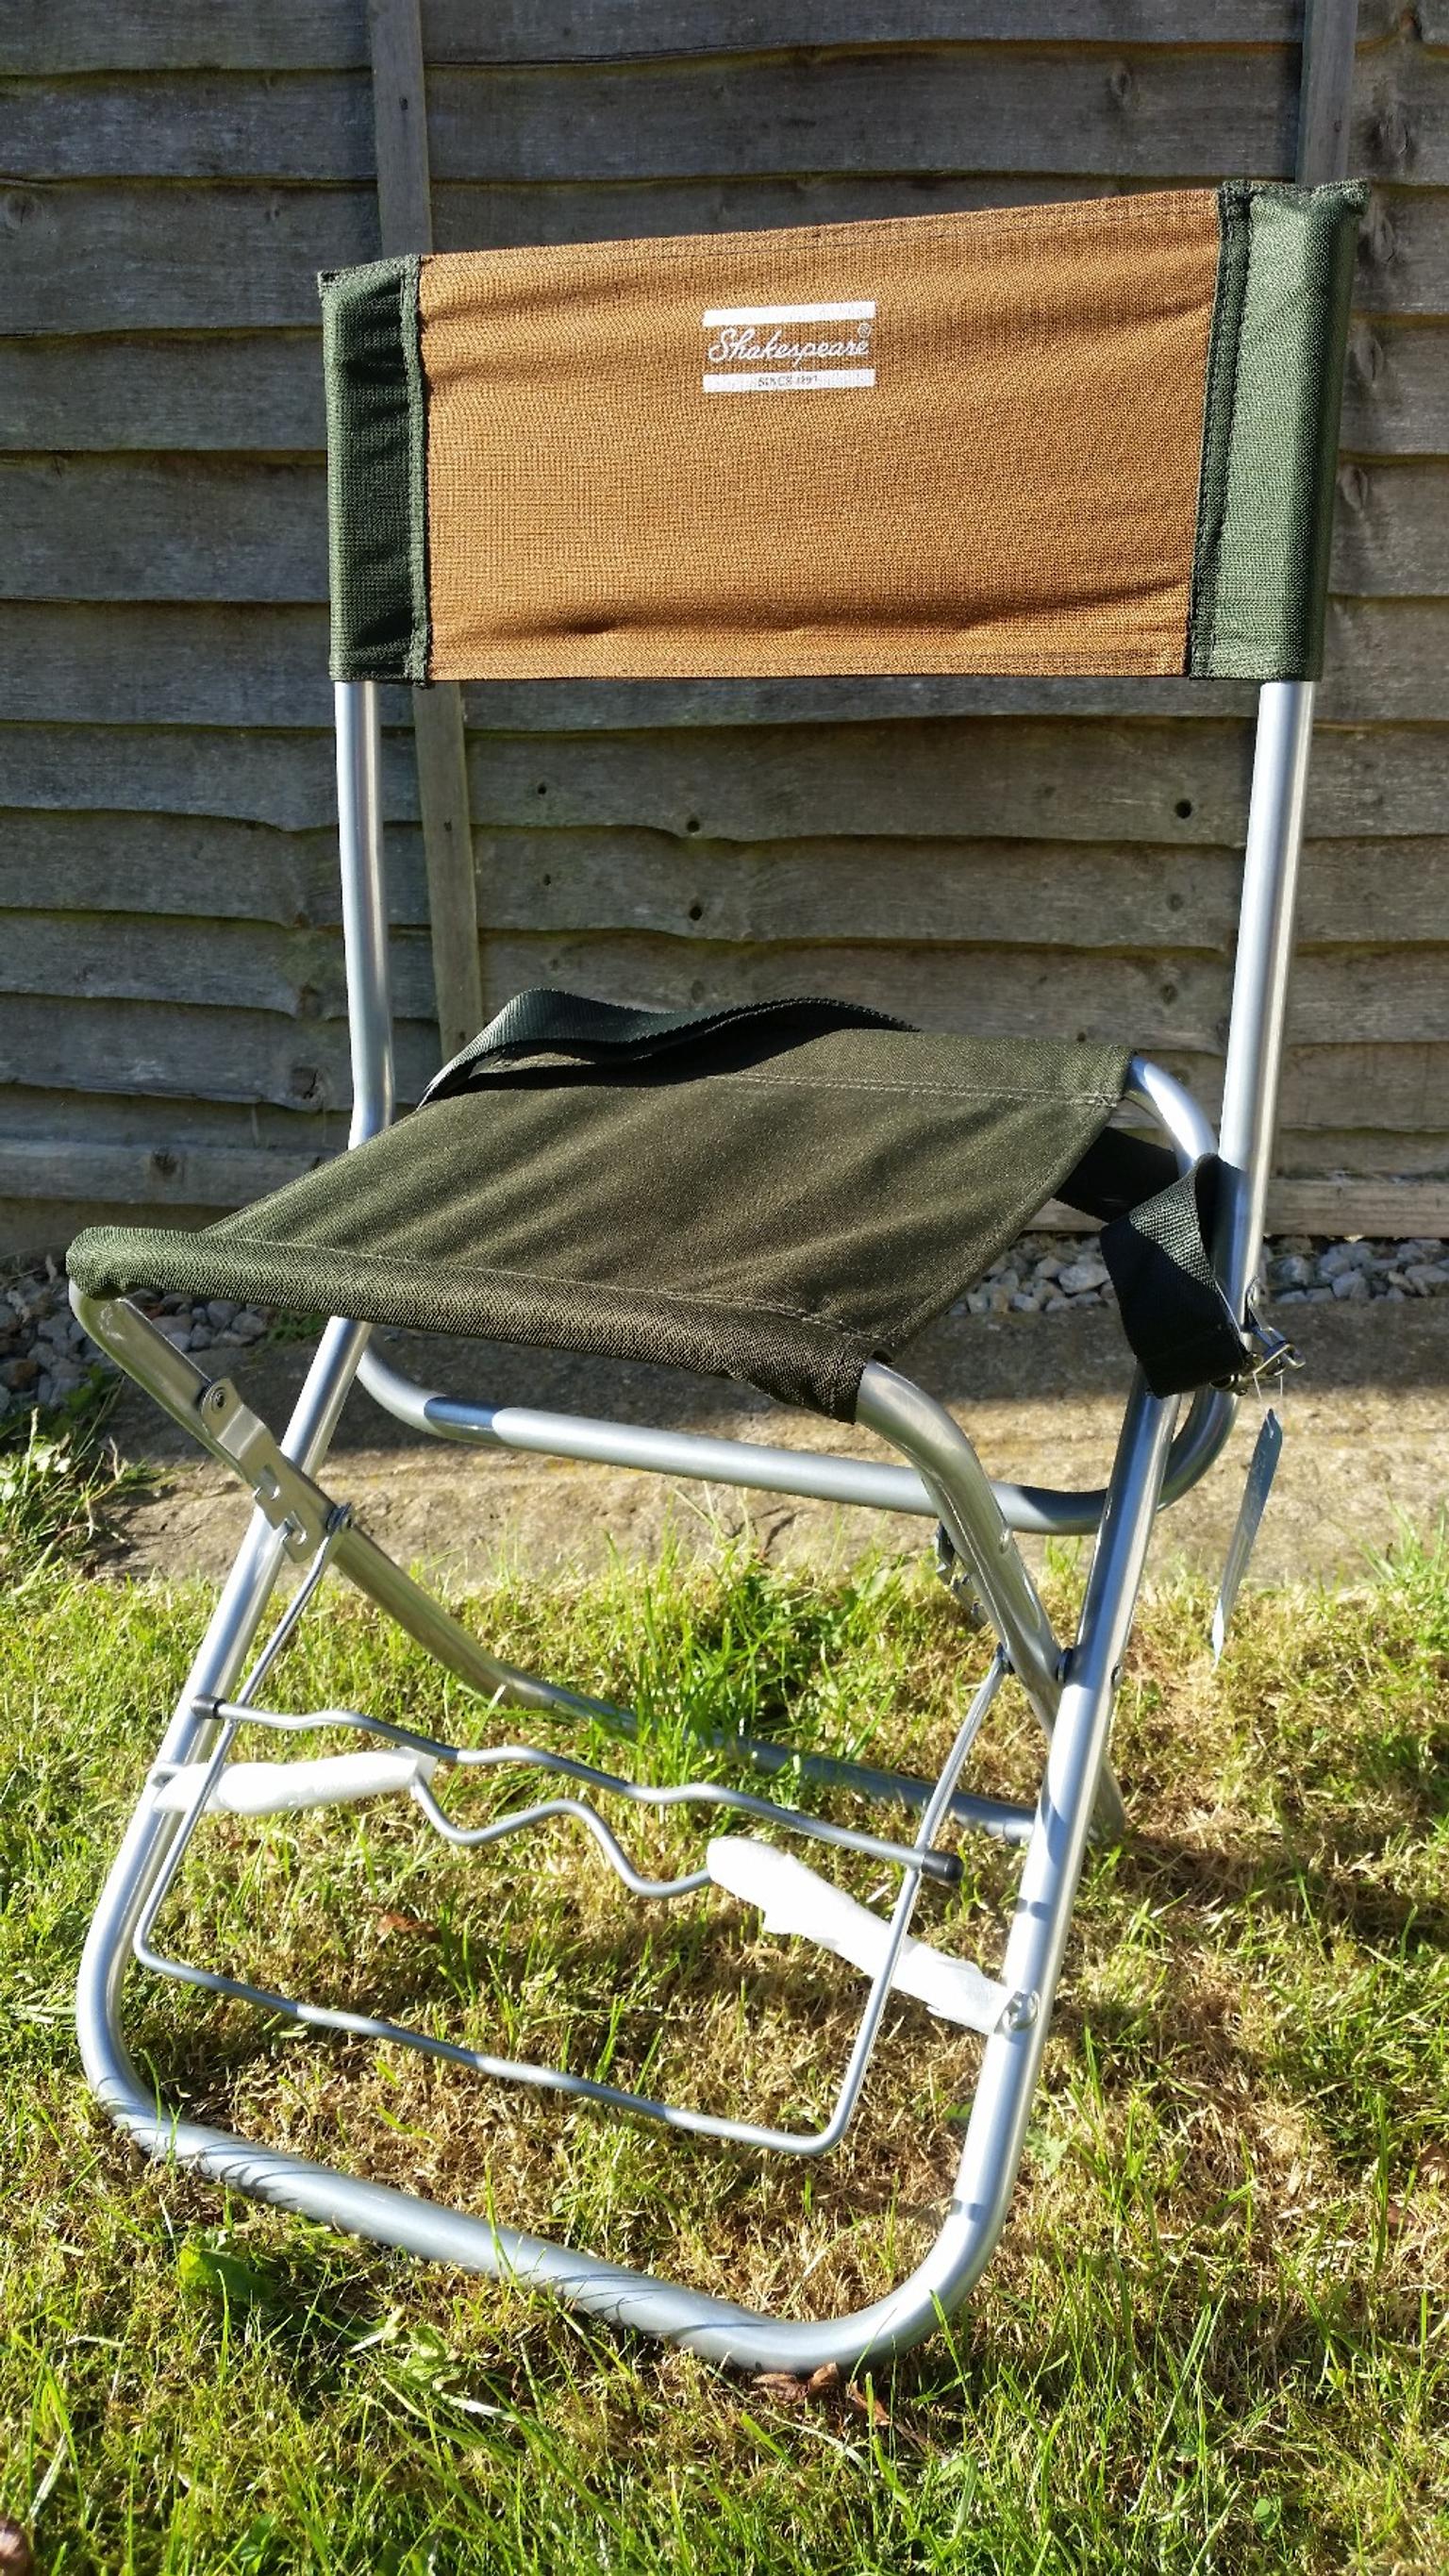 Shakespeare Folding Chair With Rod Rest In Cv21 Rugby For 20 00